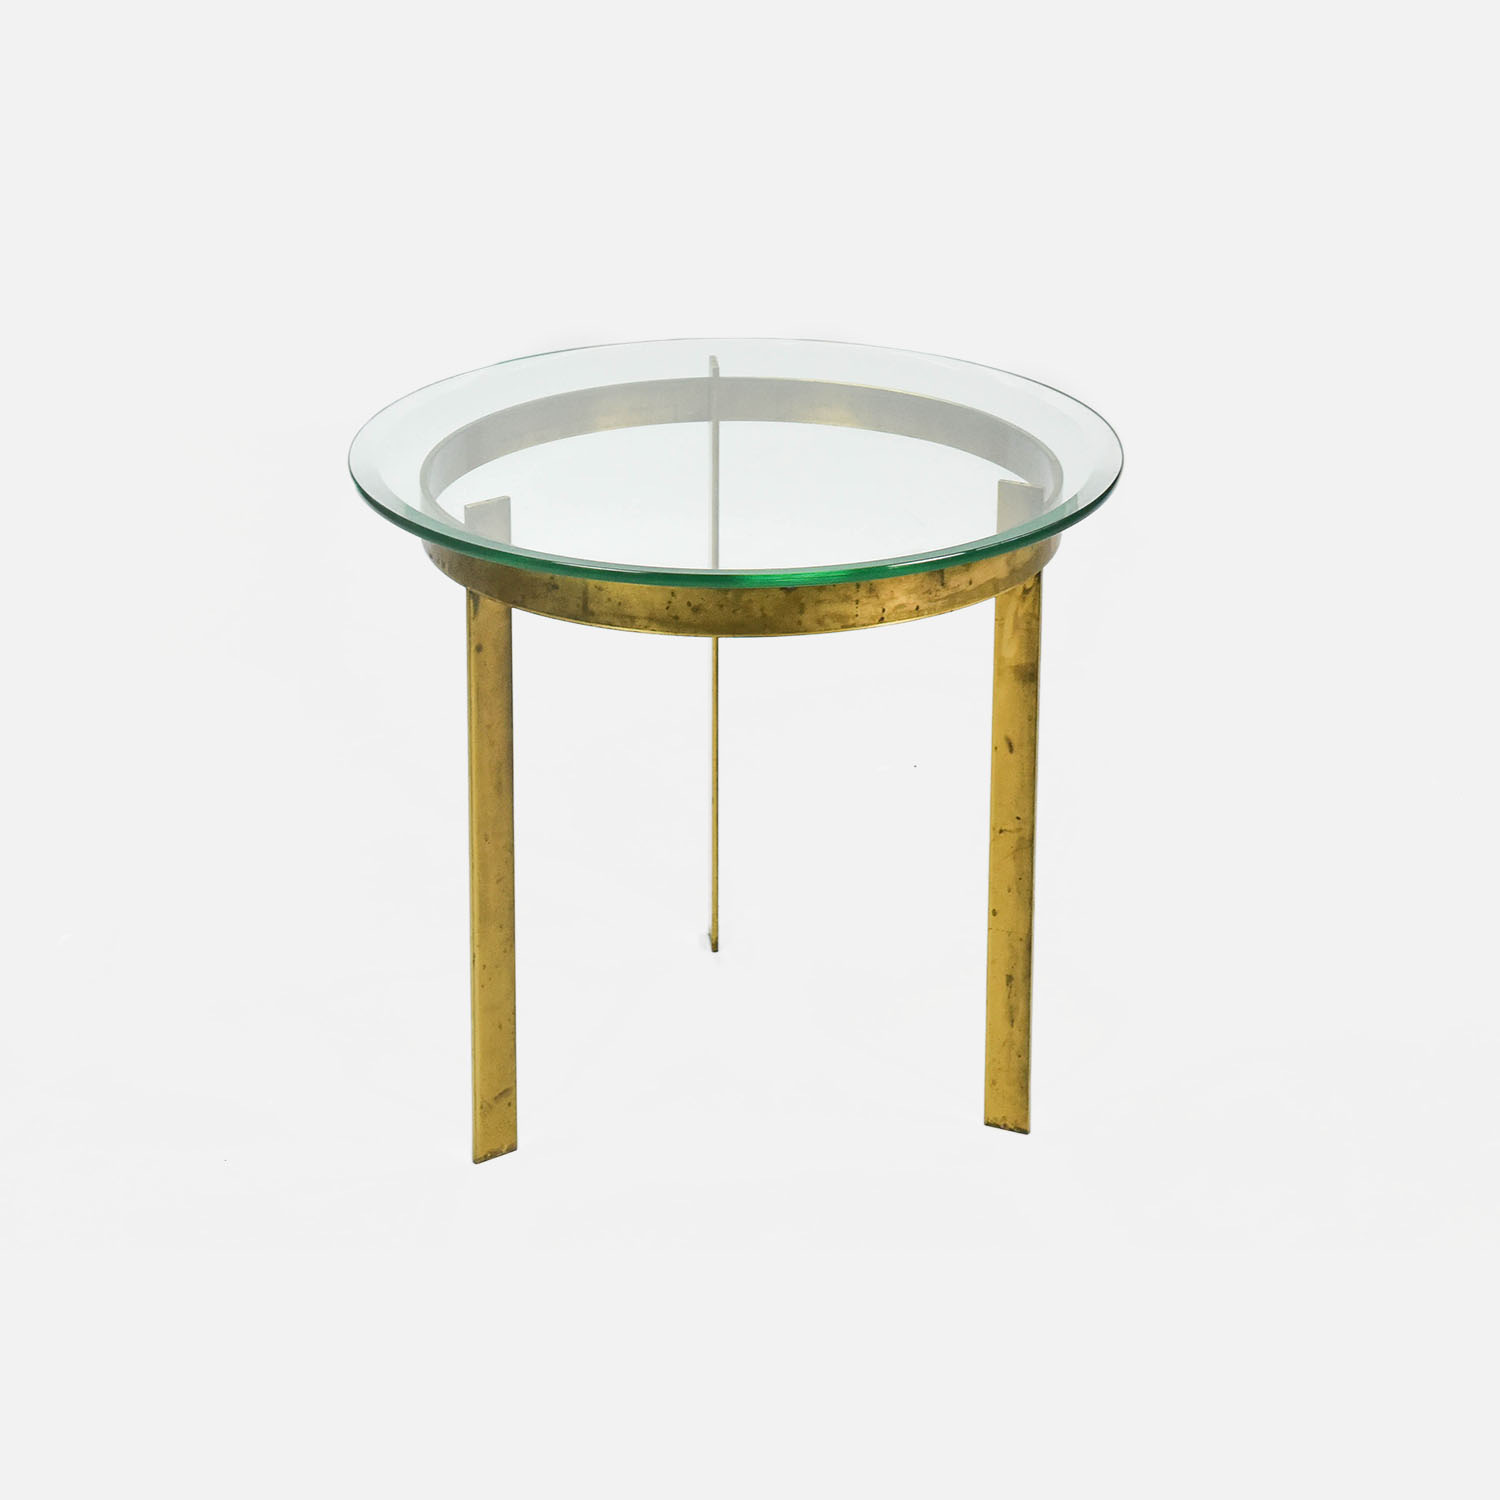 Modernist Bauhaus Flat Solid Brass Bar and Glass Round Side Table